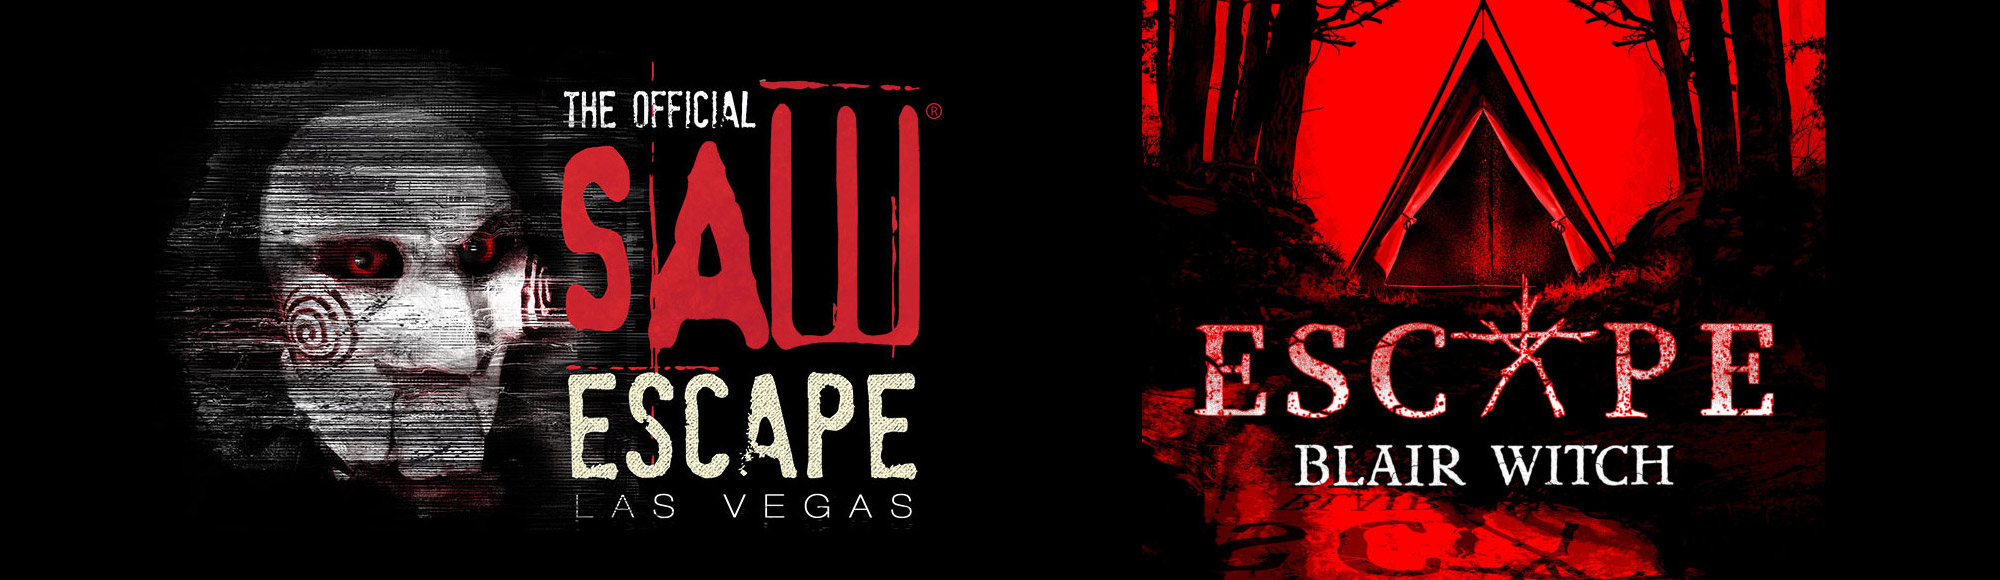 The Official SAW Escape Room & Escape Blair Witch attraction